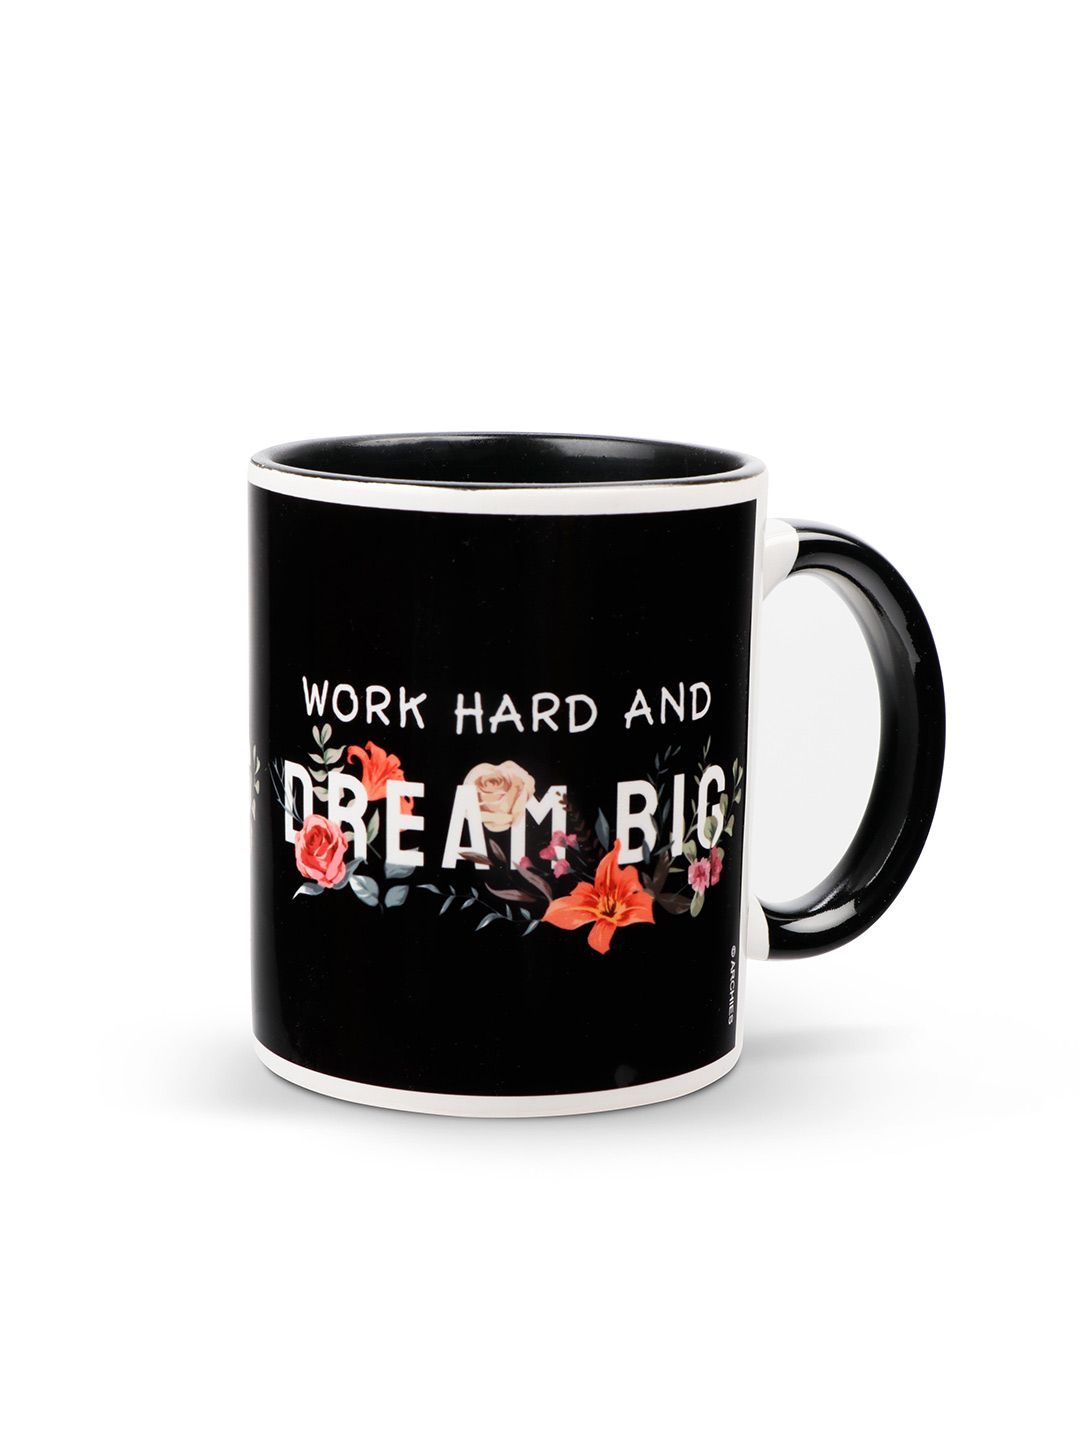 Archies Black & White Printed Ceramic Glossy Mugs Set of Cups and Mugs Price in India